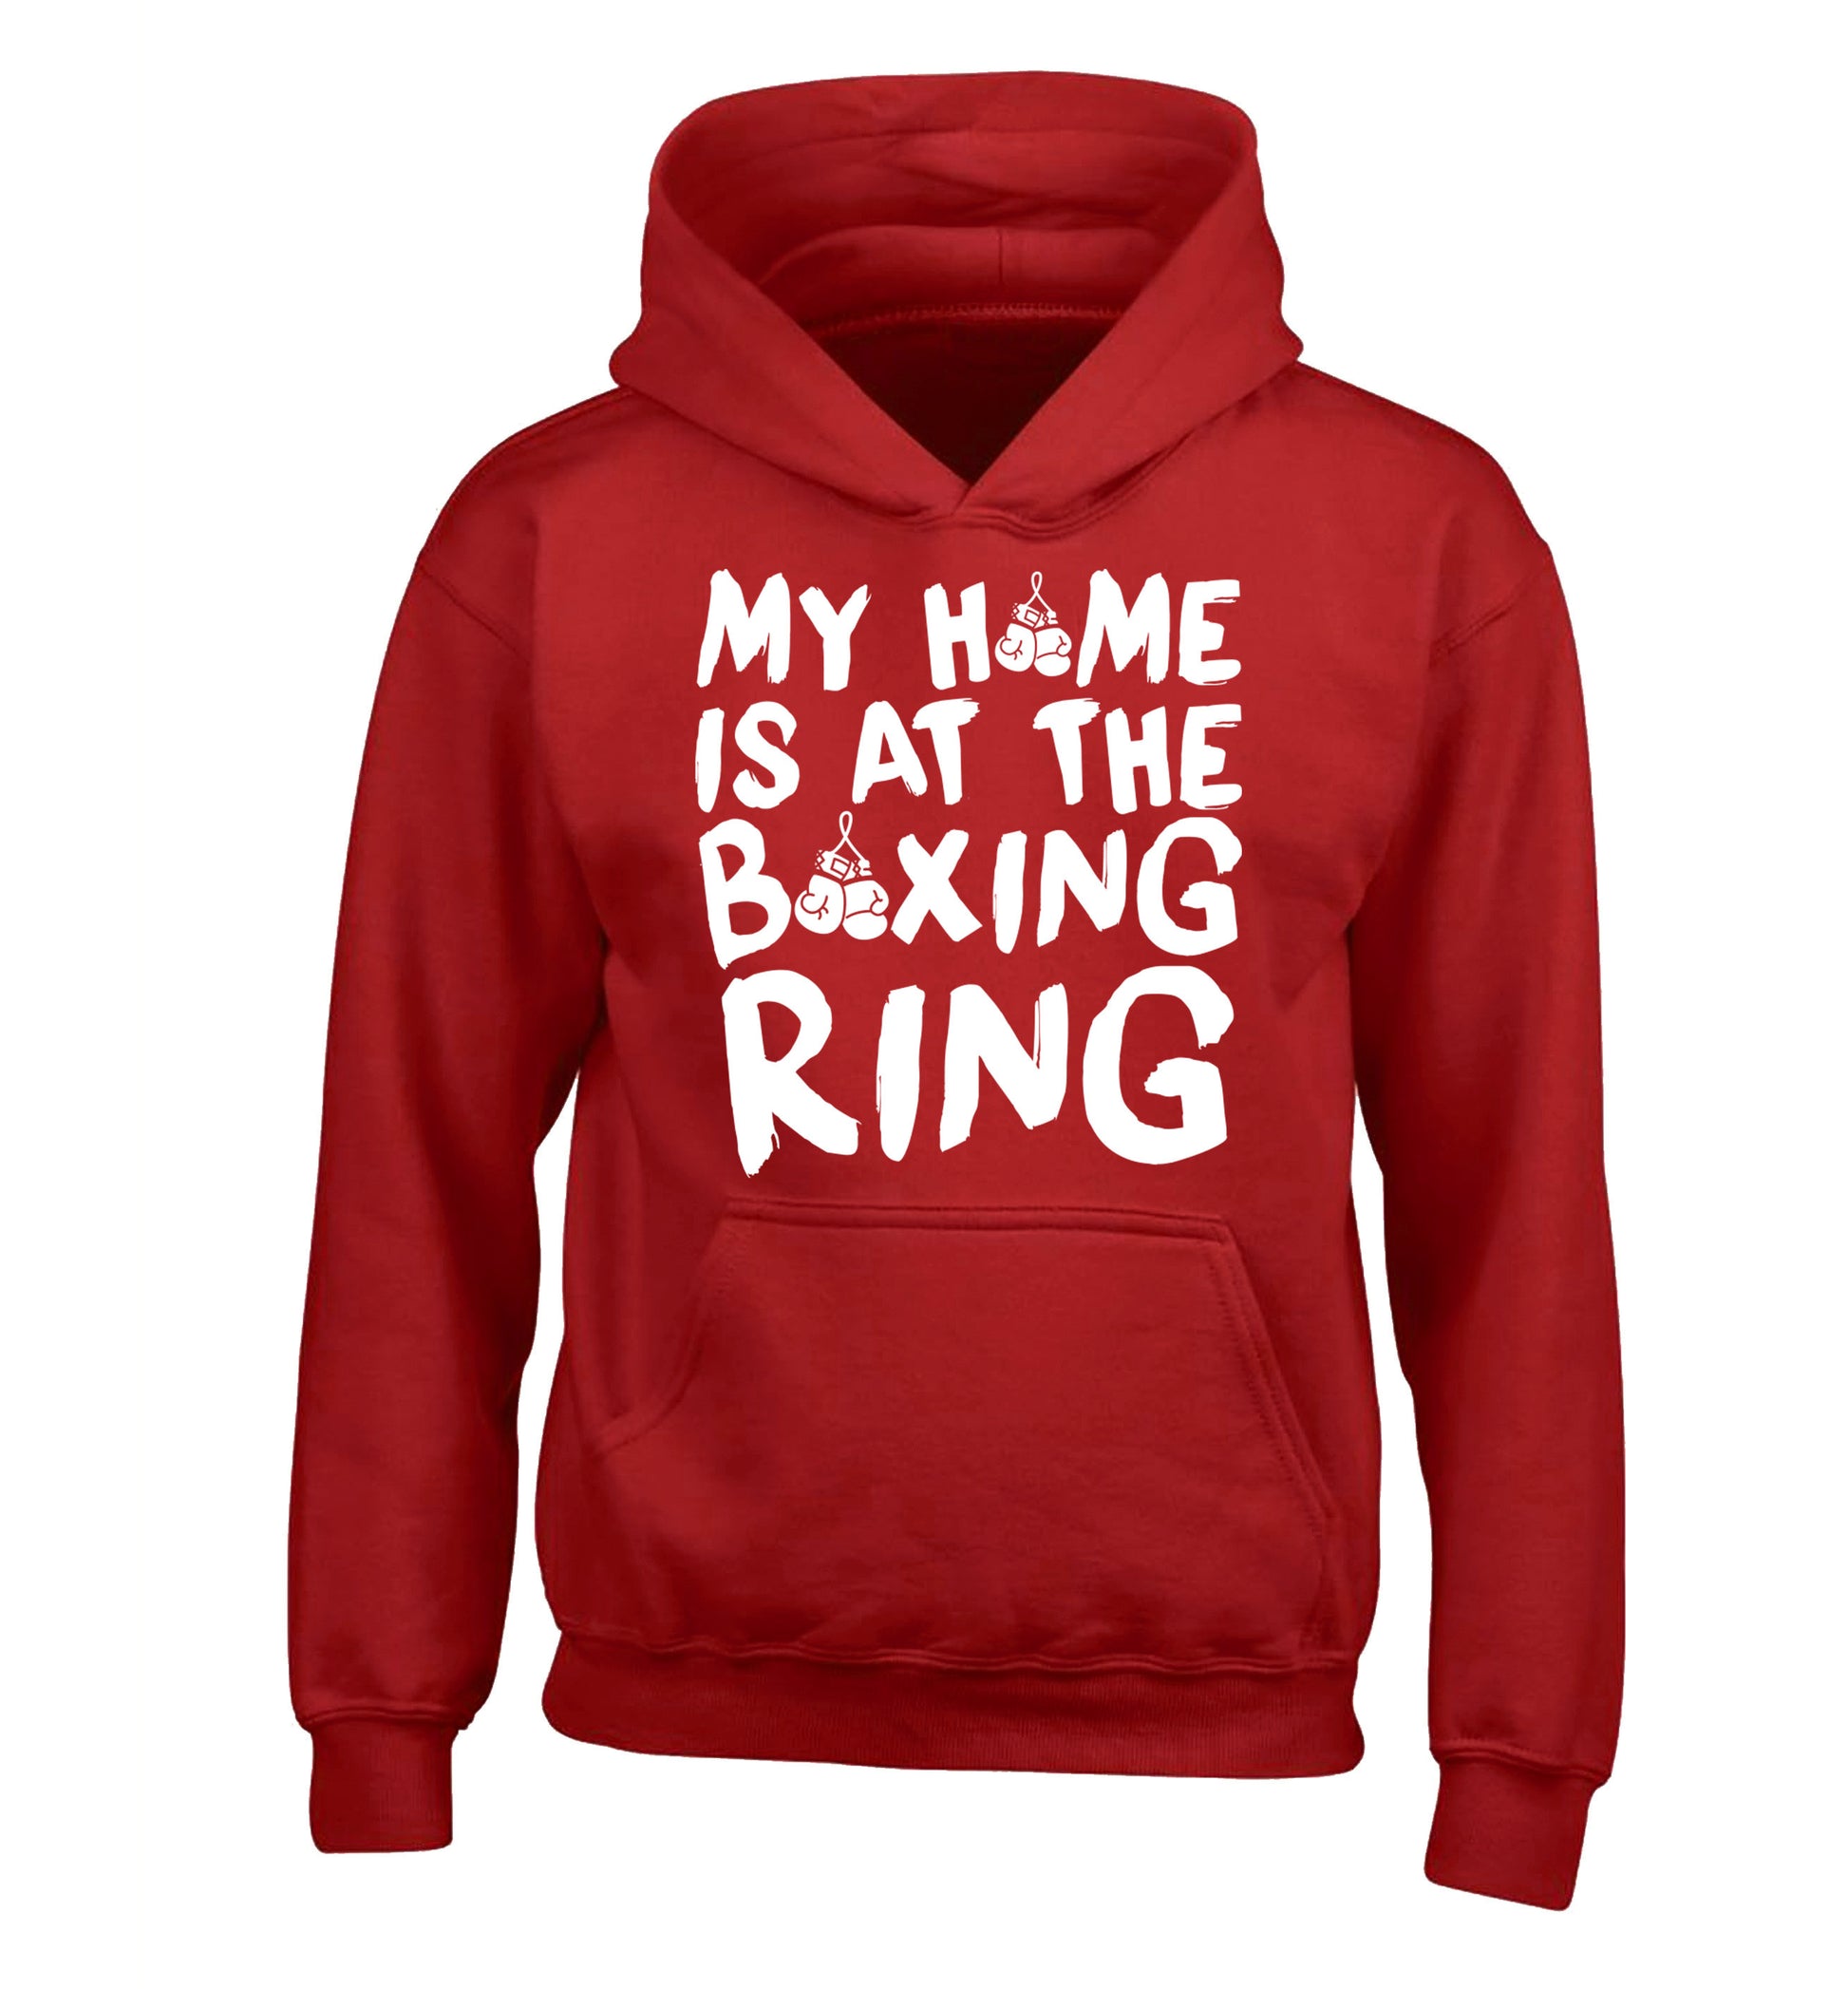 My home is at the boxing ring children's red hoodie 12-14 Years